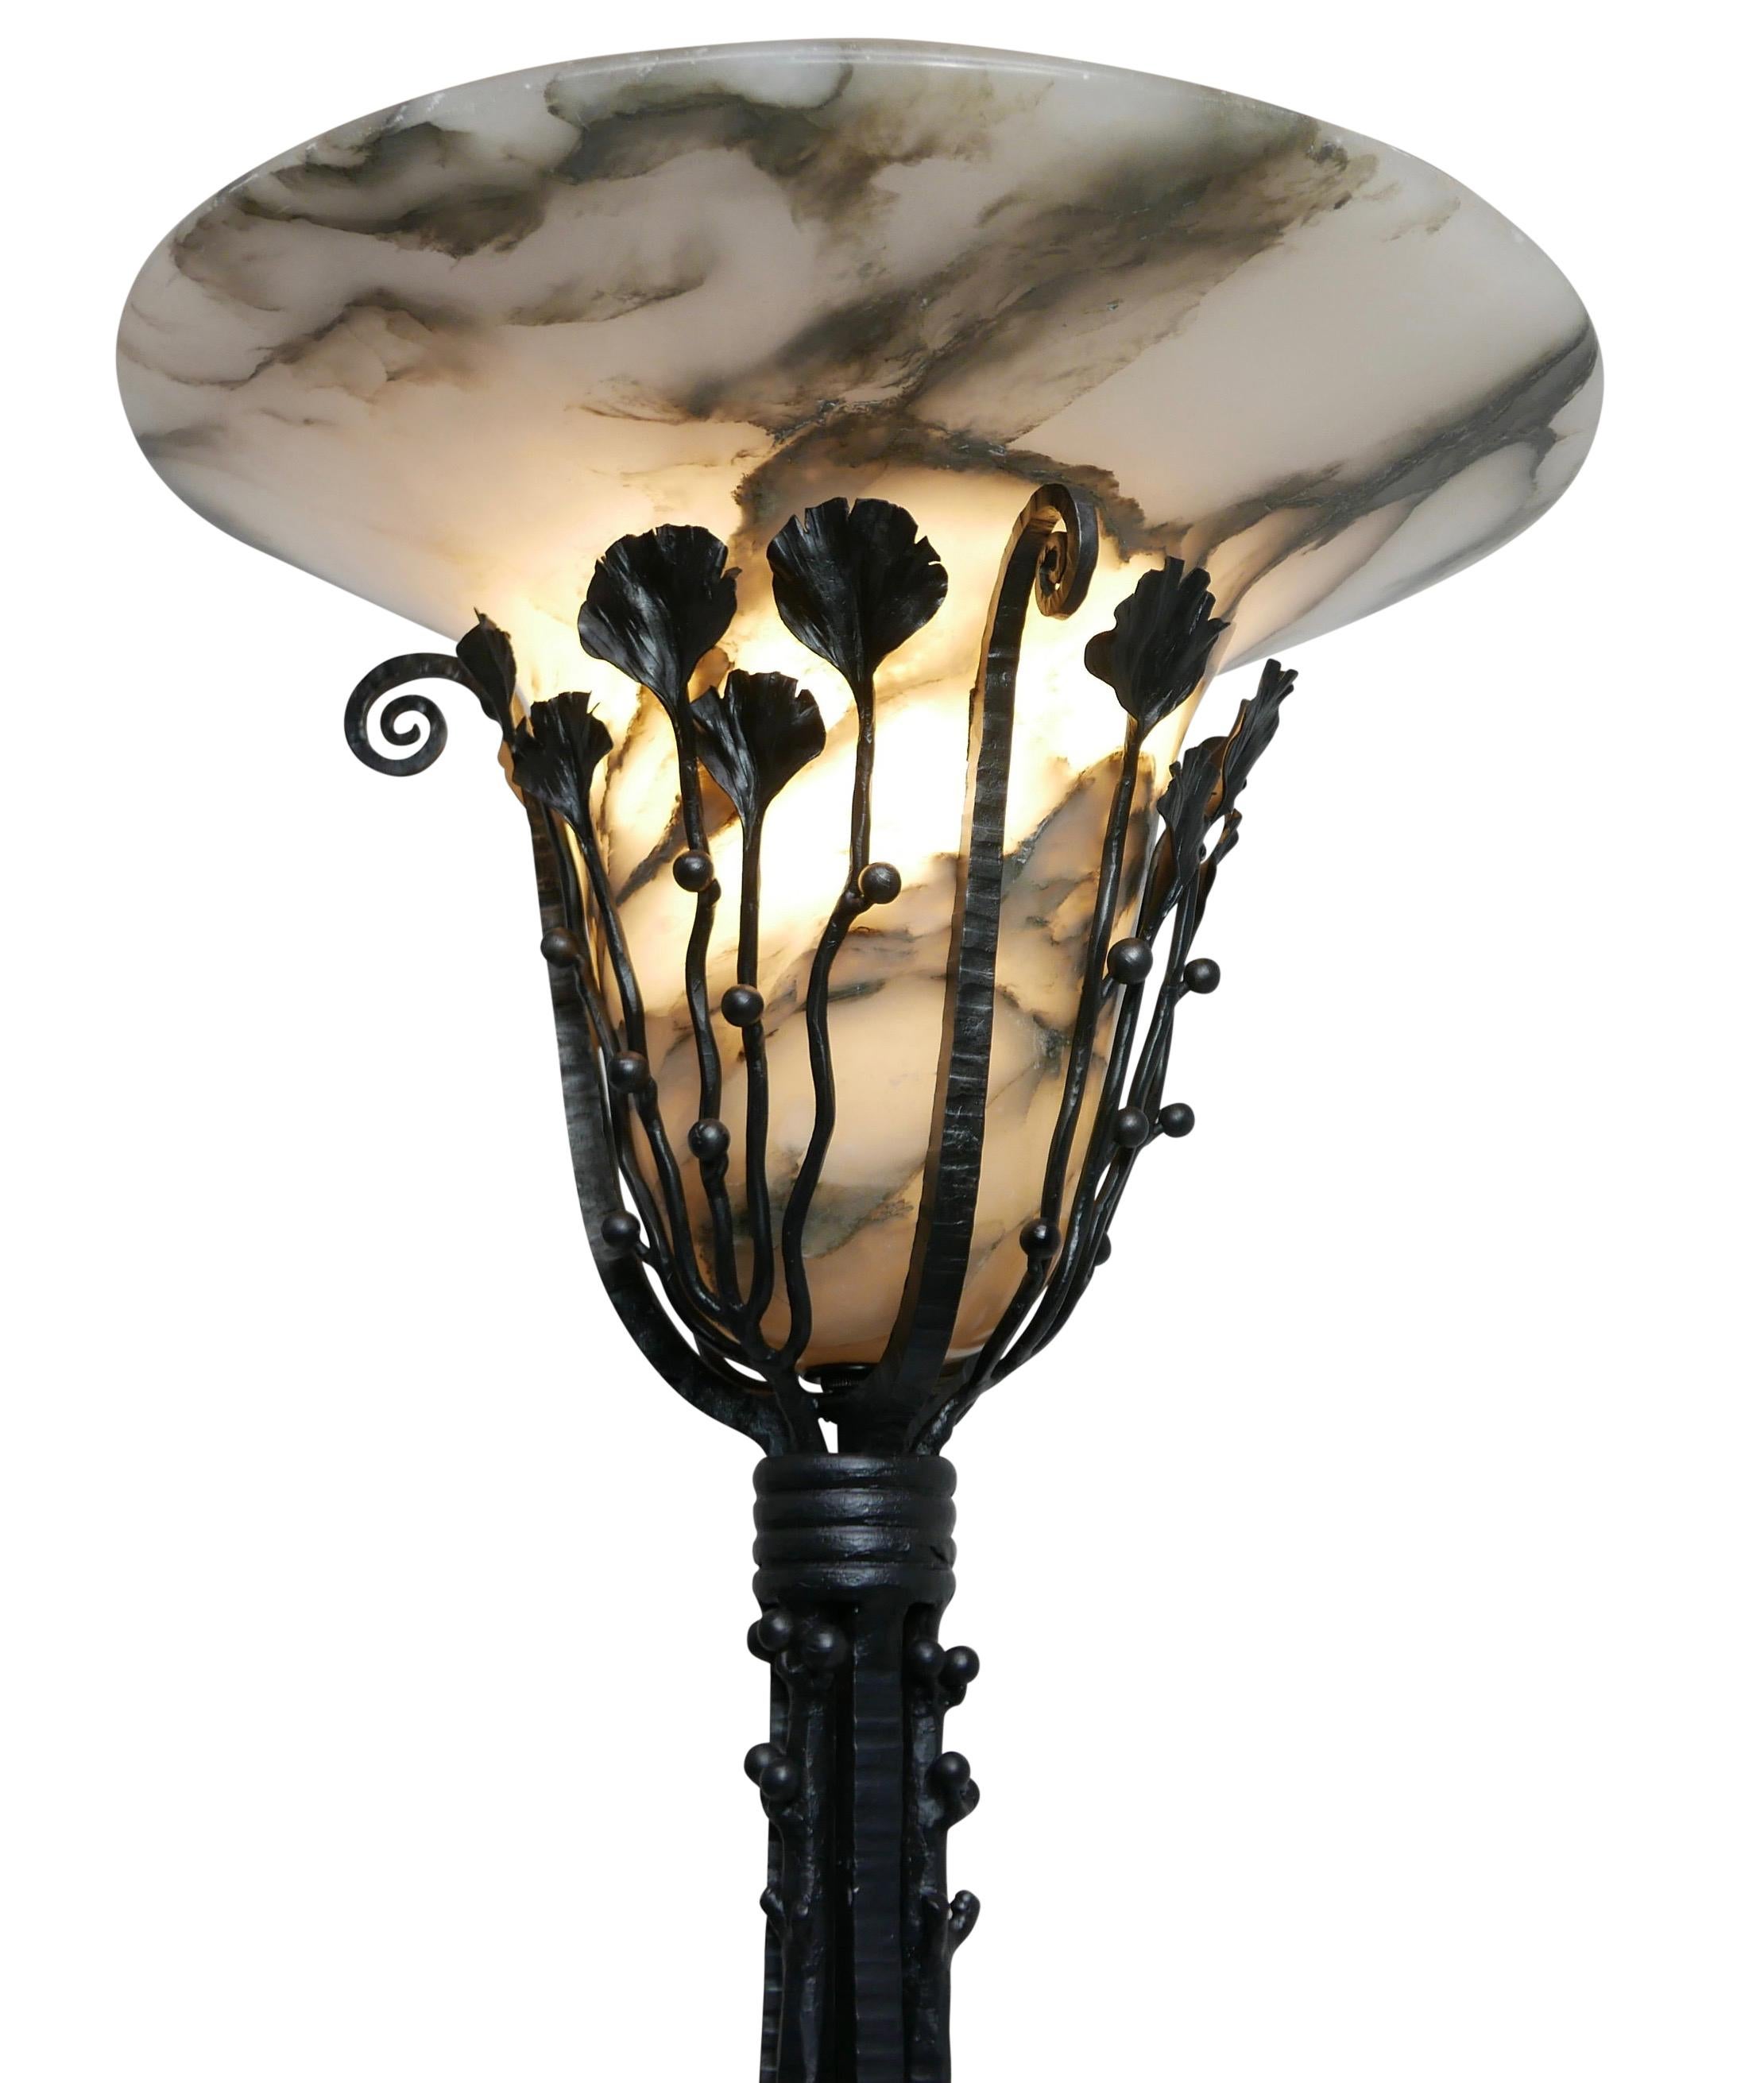 Art Deco Wrought Iron Floor Lamp with Alabaster Shade, French, circa 1920 For Sale 5